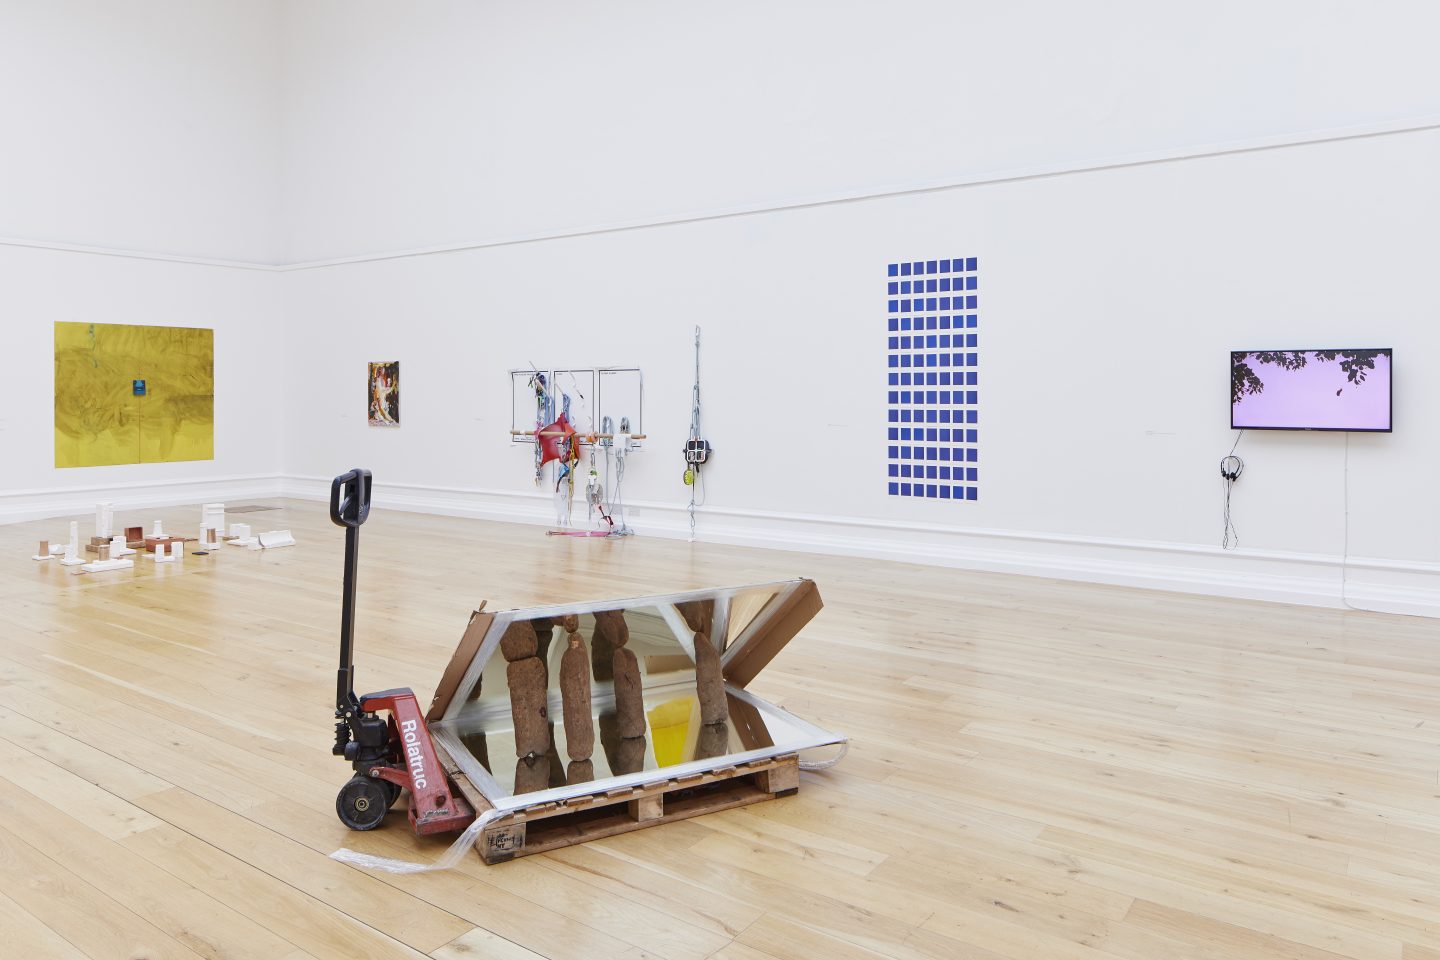 Bloomberg New Contemporaries 2019, installation view at the South London Gallery.
Photo: Andy Stagg
